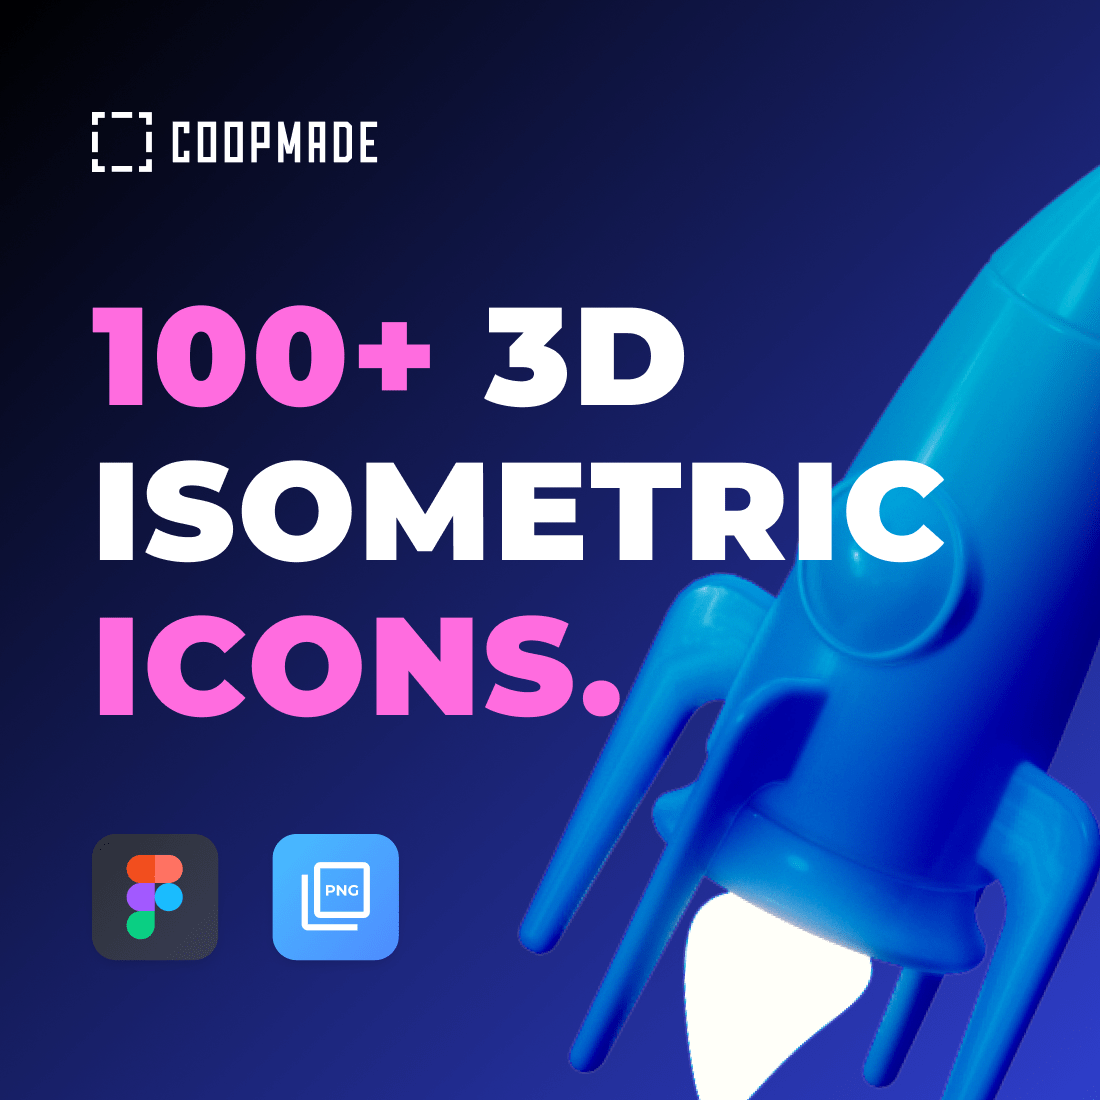 3D Isometric Icons Design Figma cover image.